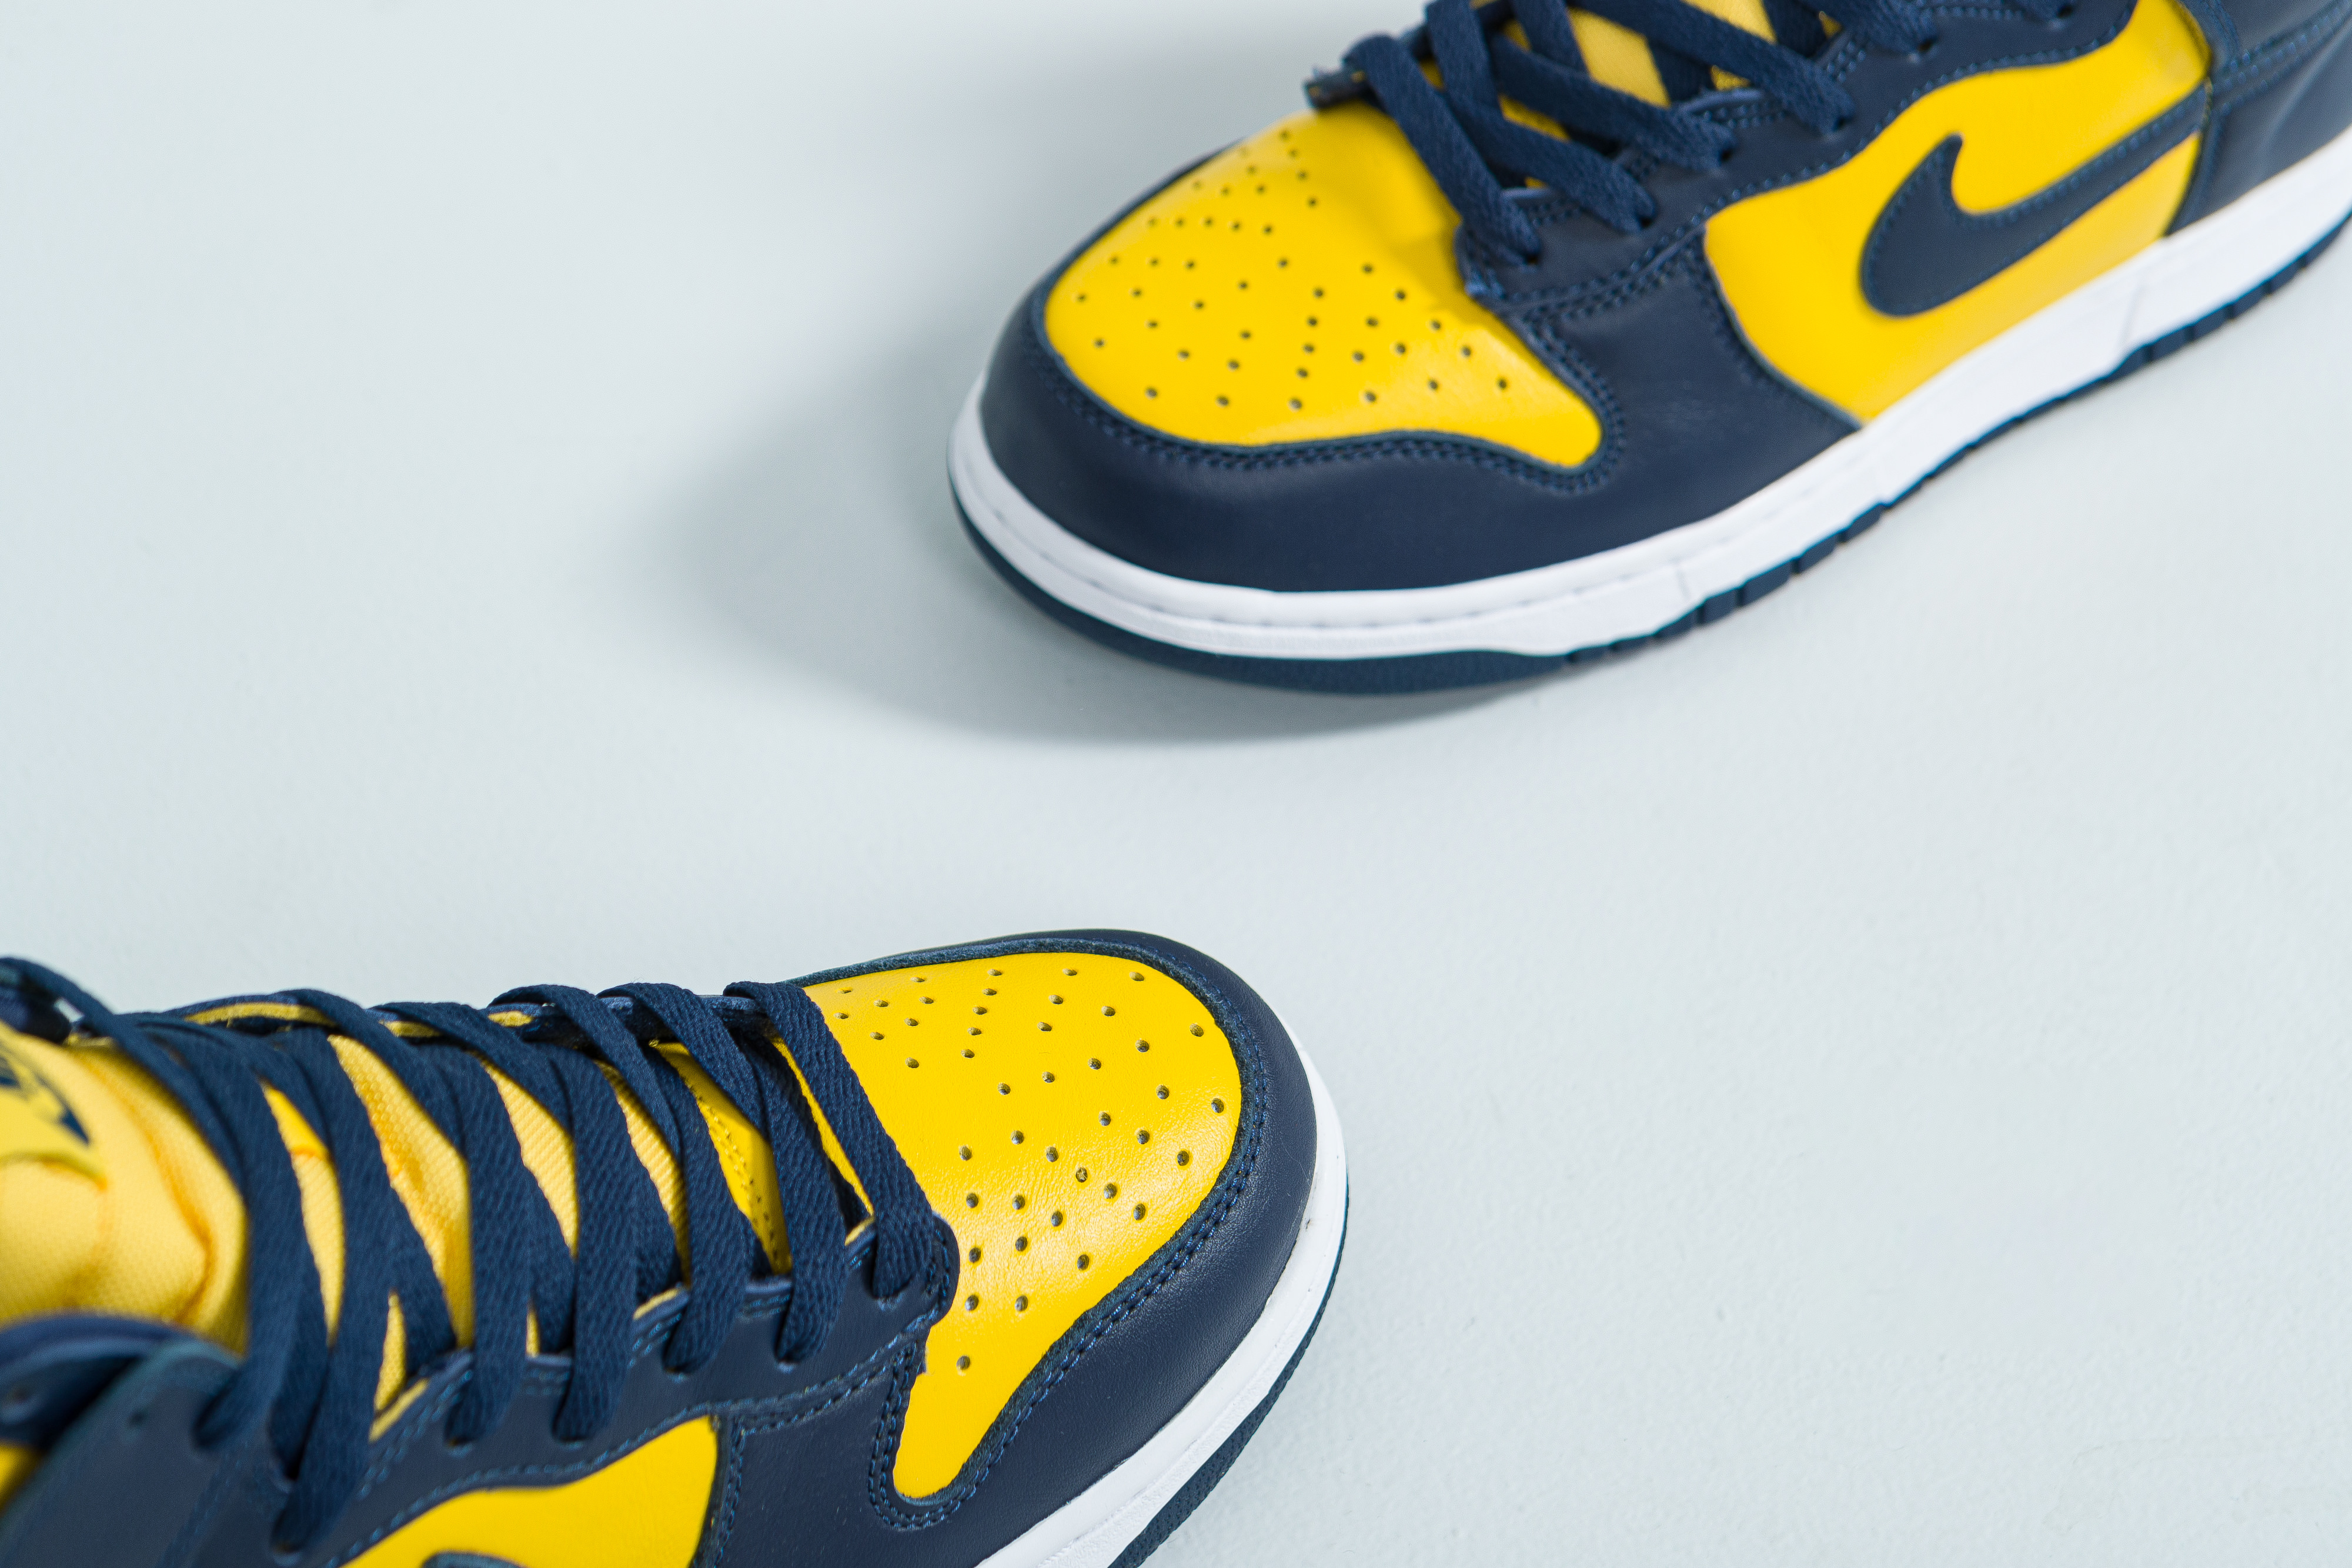 Up There Launches - Nike Dunk High SP - Varsity Maize/Midnight Navy 'Michigan'